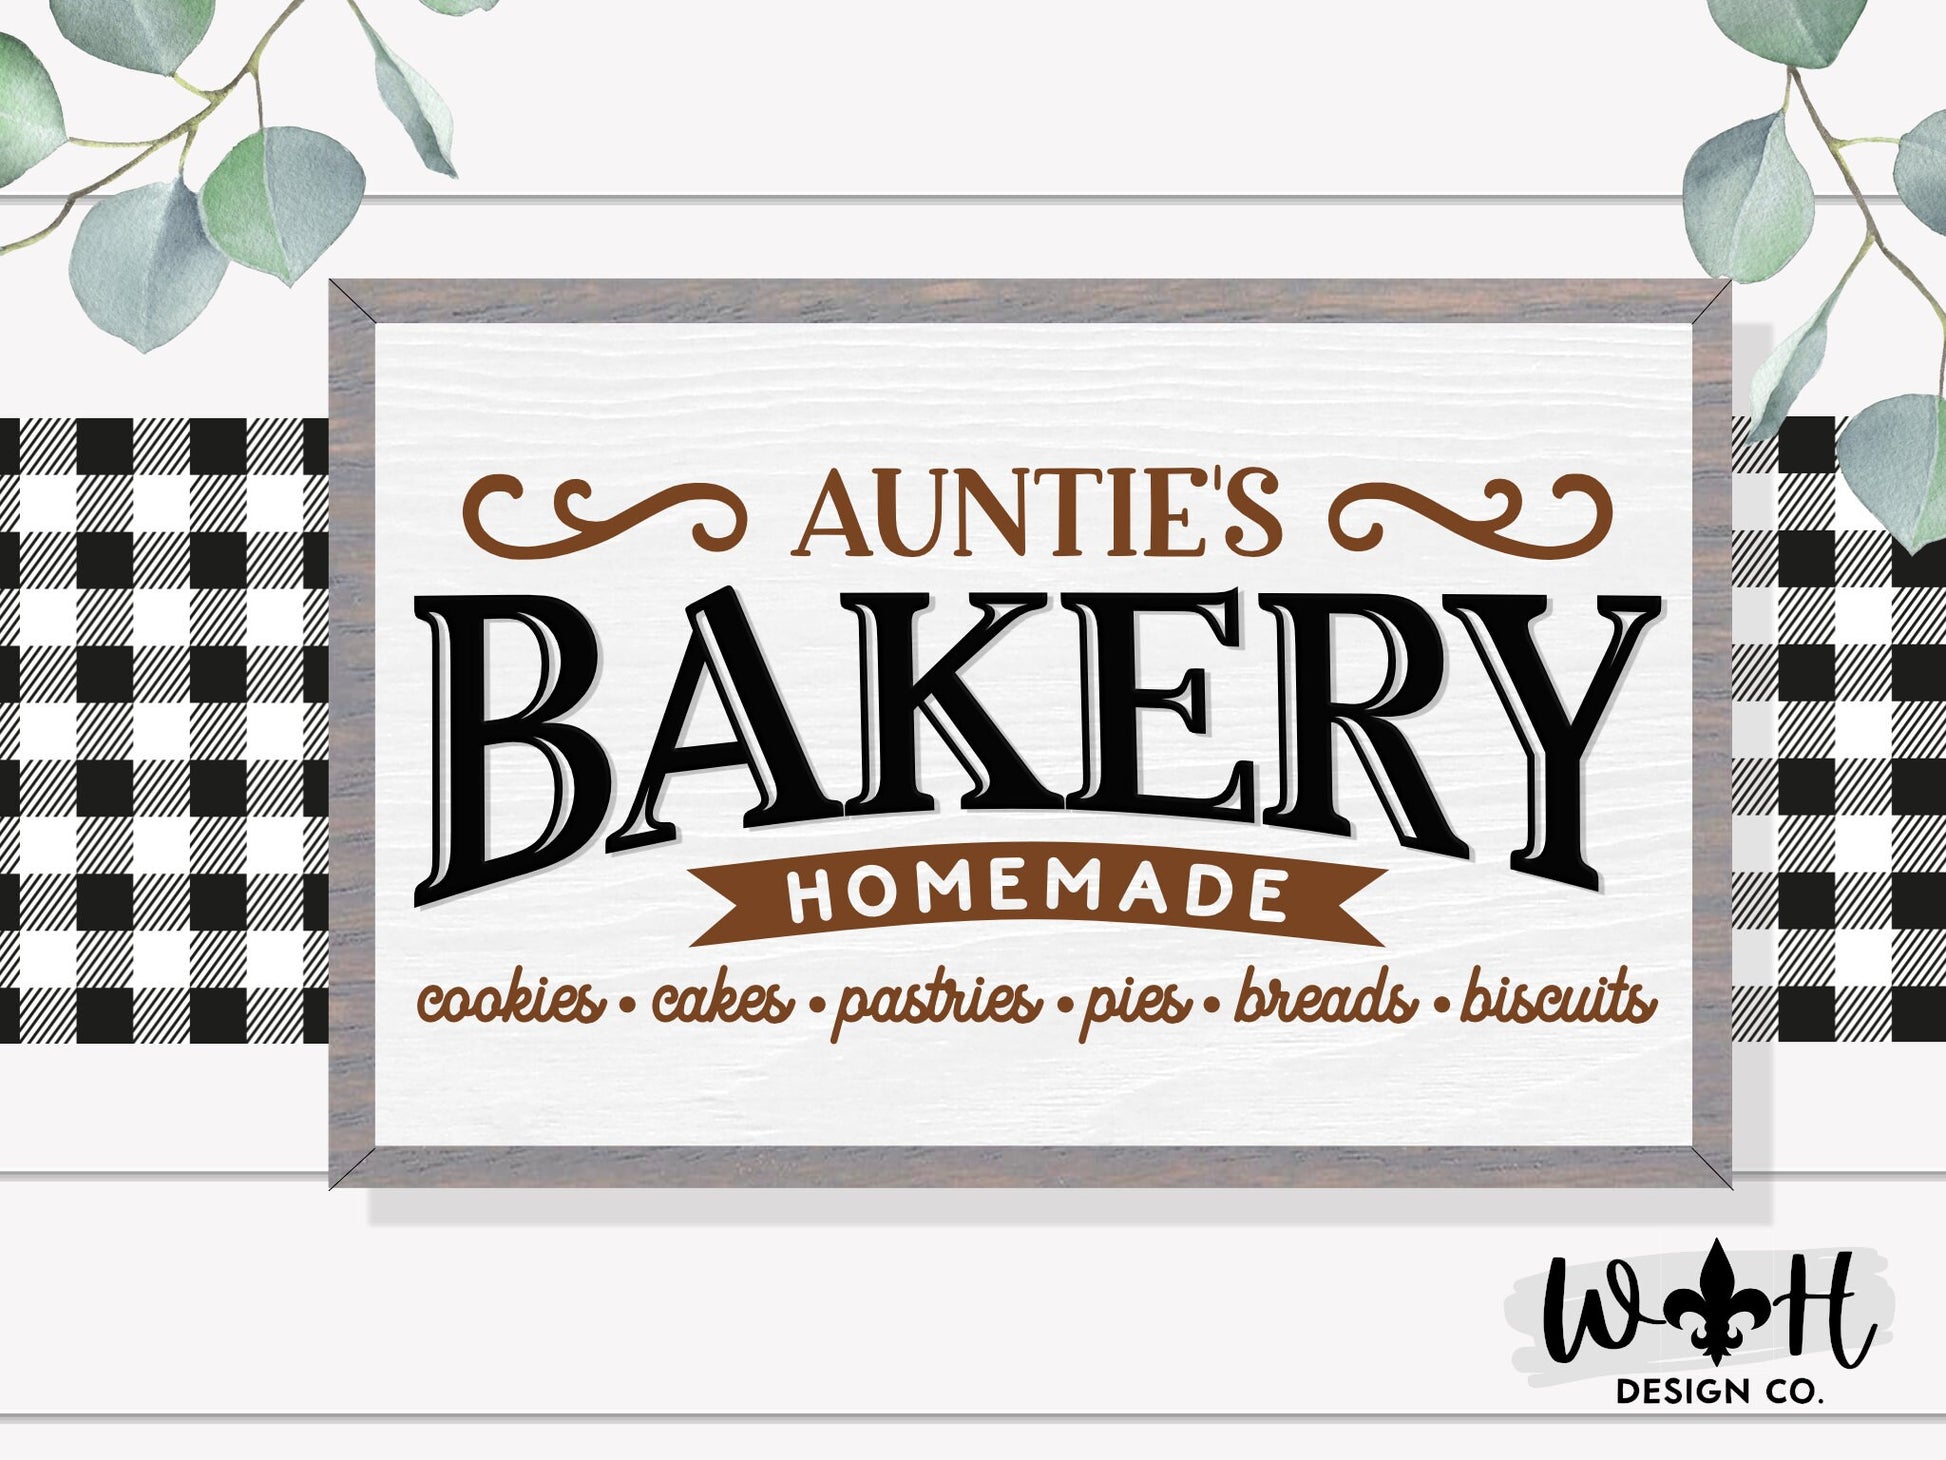 Momma’s Bakery - Homemade Cookies Cakes - Coffee Bar Sign - Seasonal Farmhouse Home and Kitchen Decor - Handcrafted Wooden Framed Wall Art